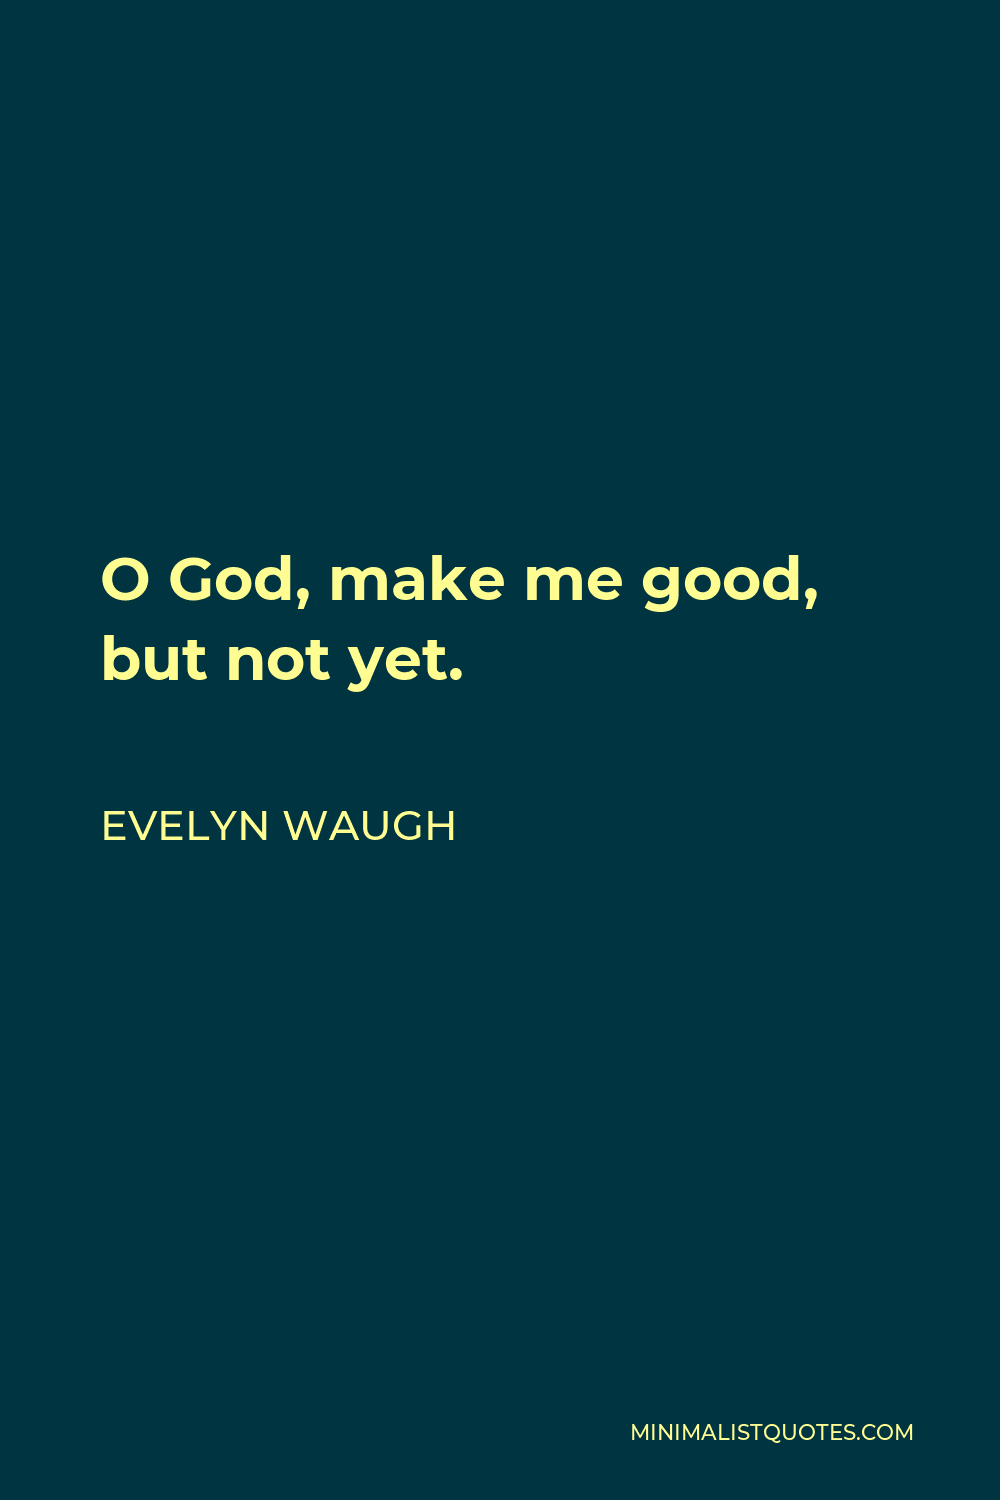 Evelyn Waugh Quote - O God, make me good, but not yet.